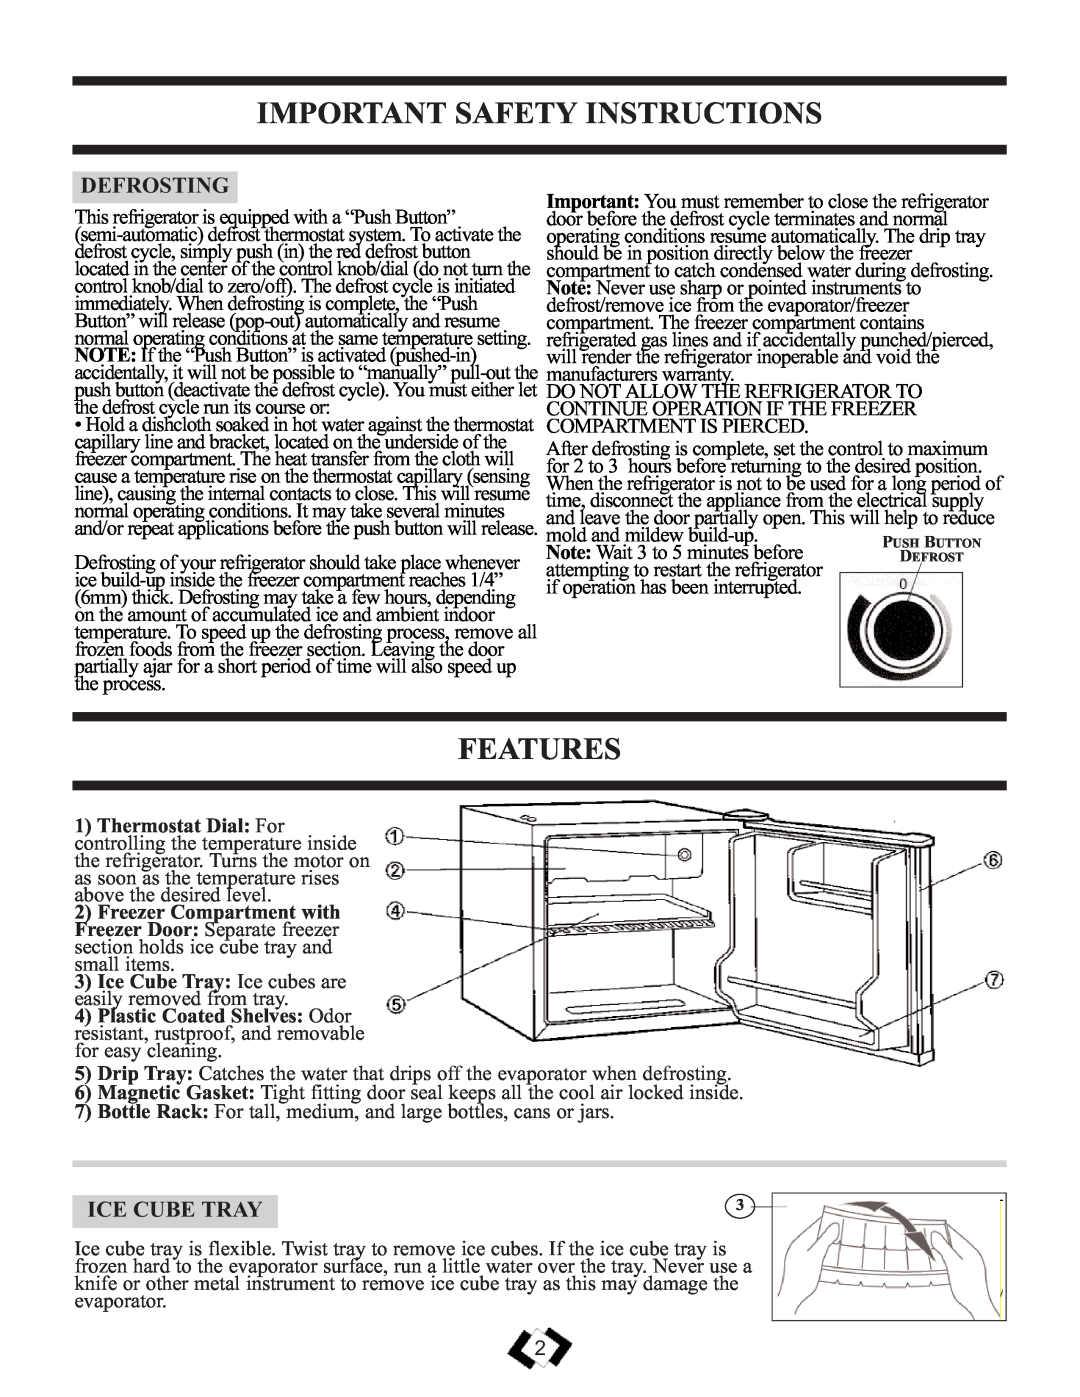 Sunbeam SBCR139WE warranty Features, Defrosting, Ice Cube Tray, Important Safety Instructions 